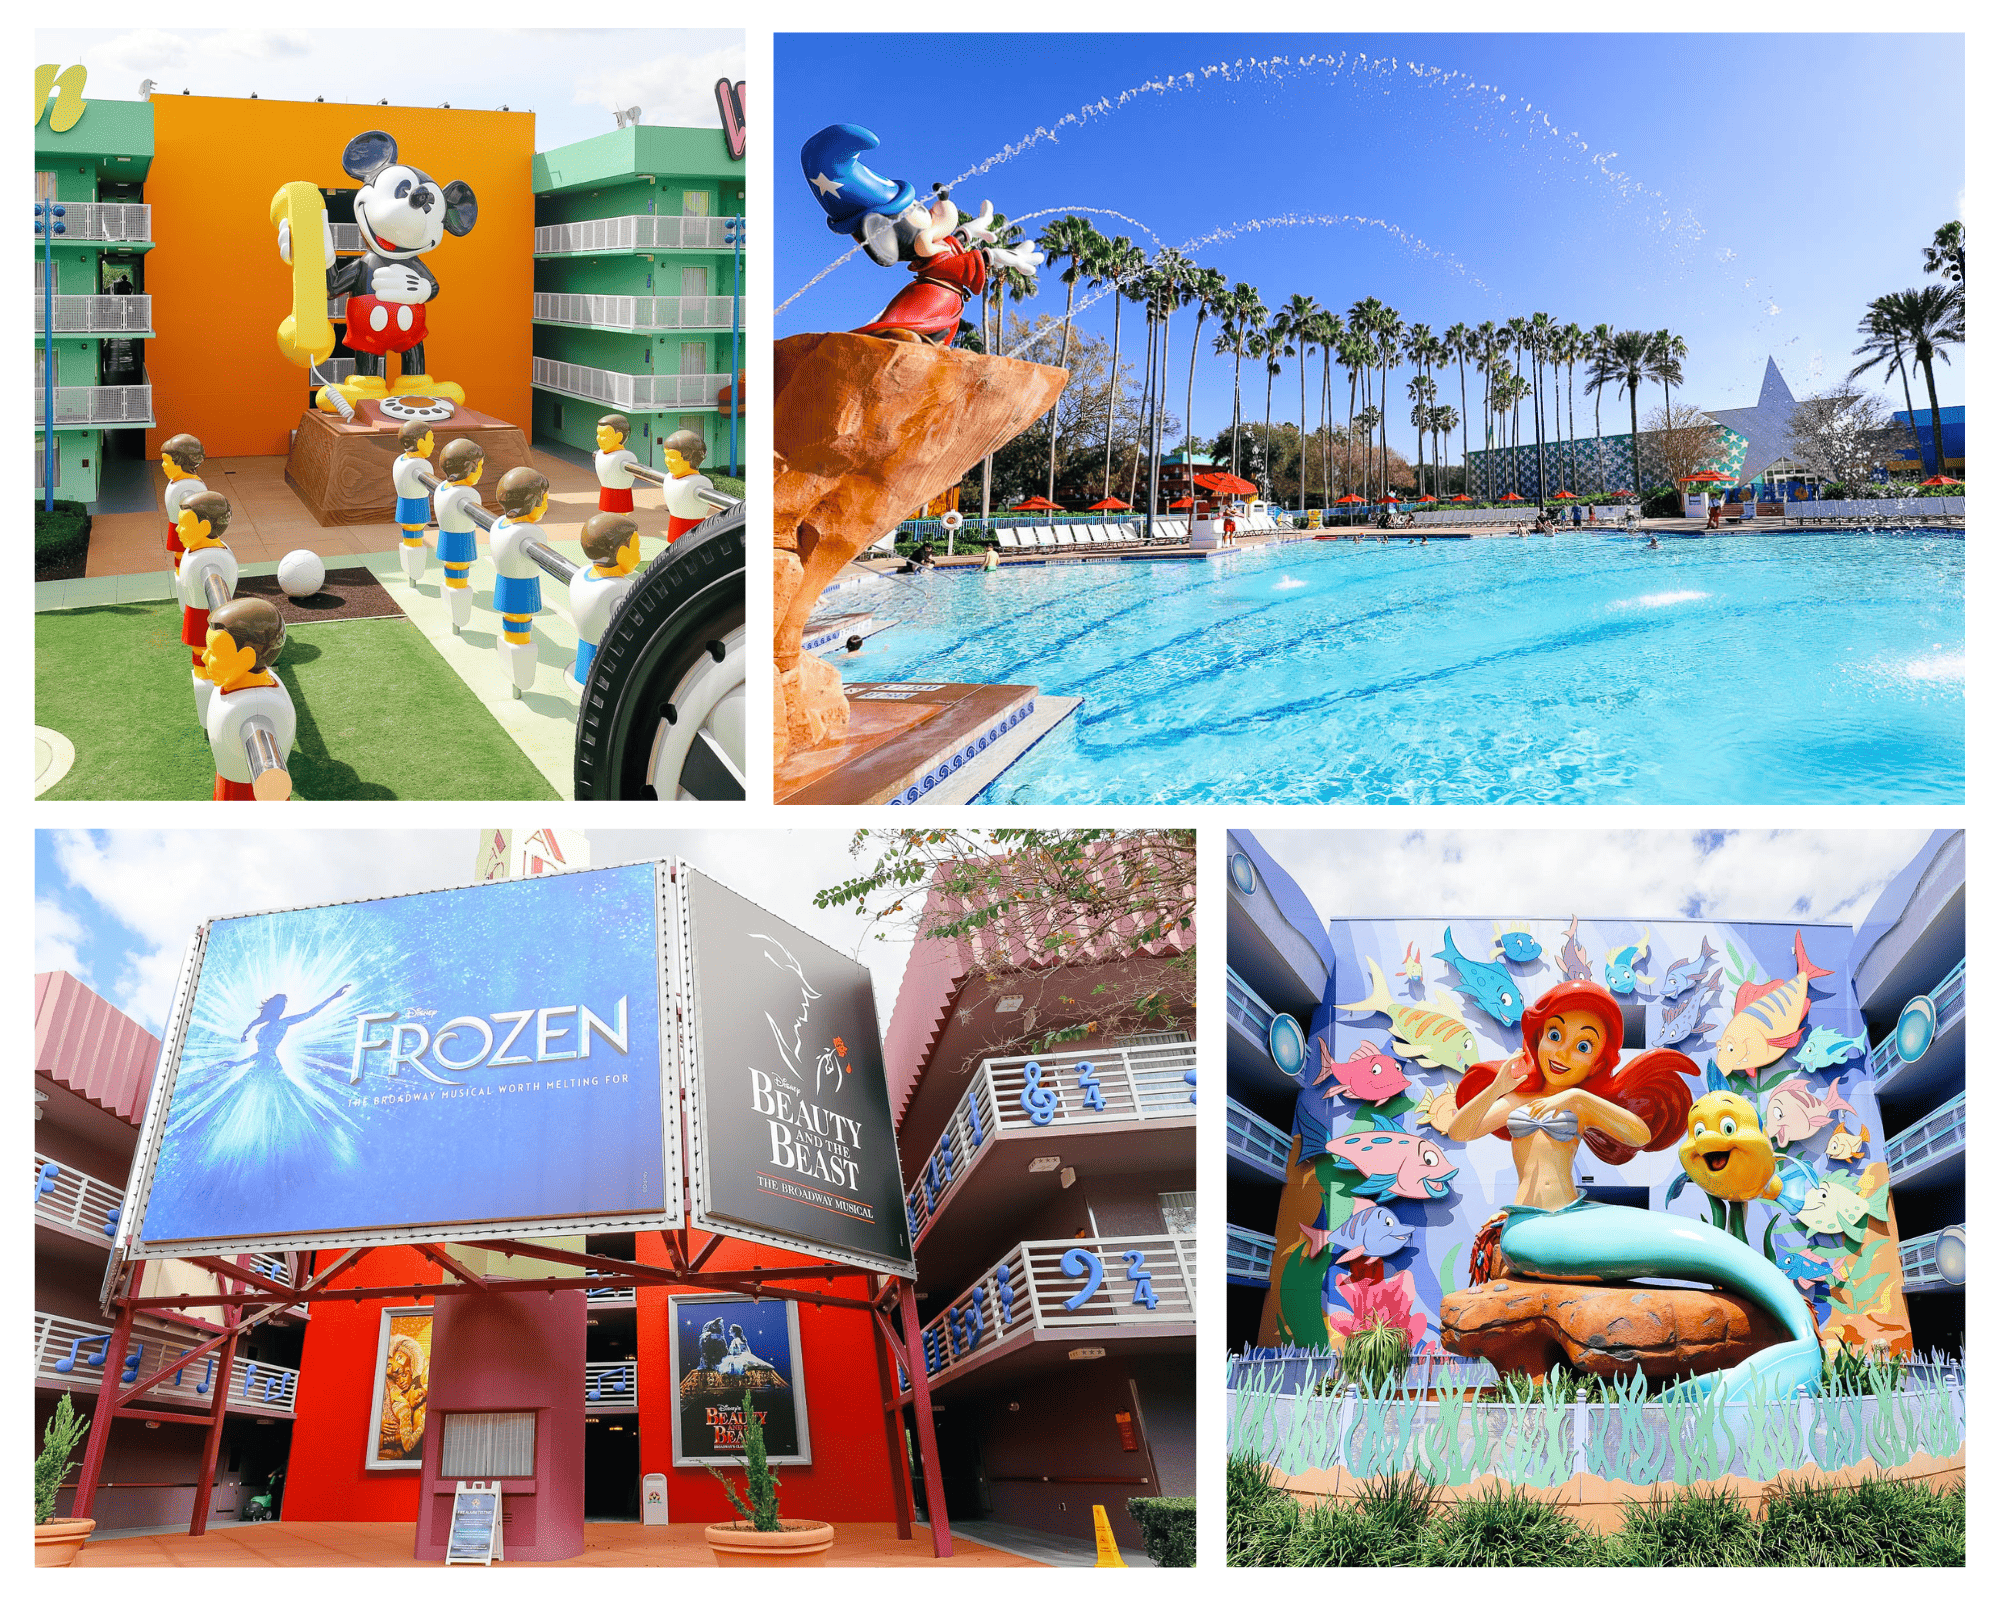 multi image photo that shows the value resorts at Disney World